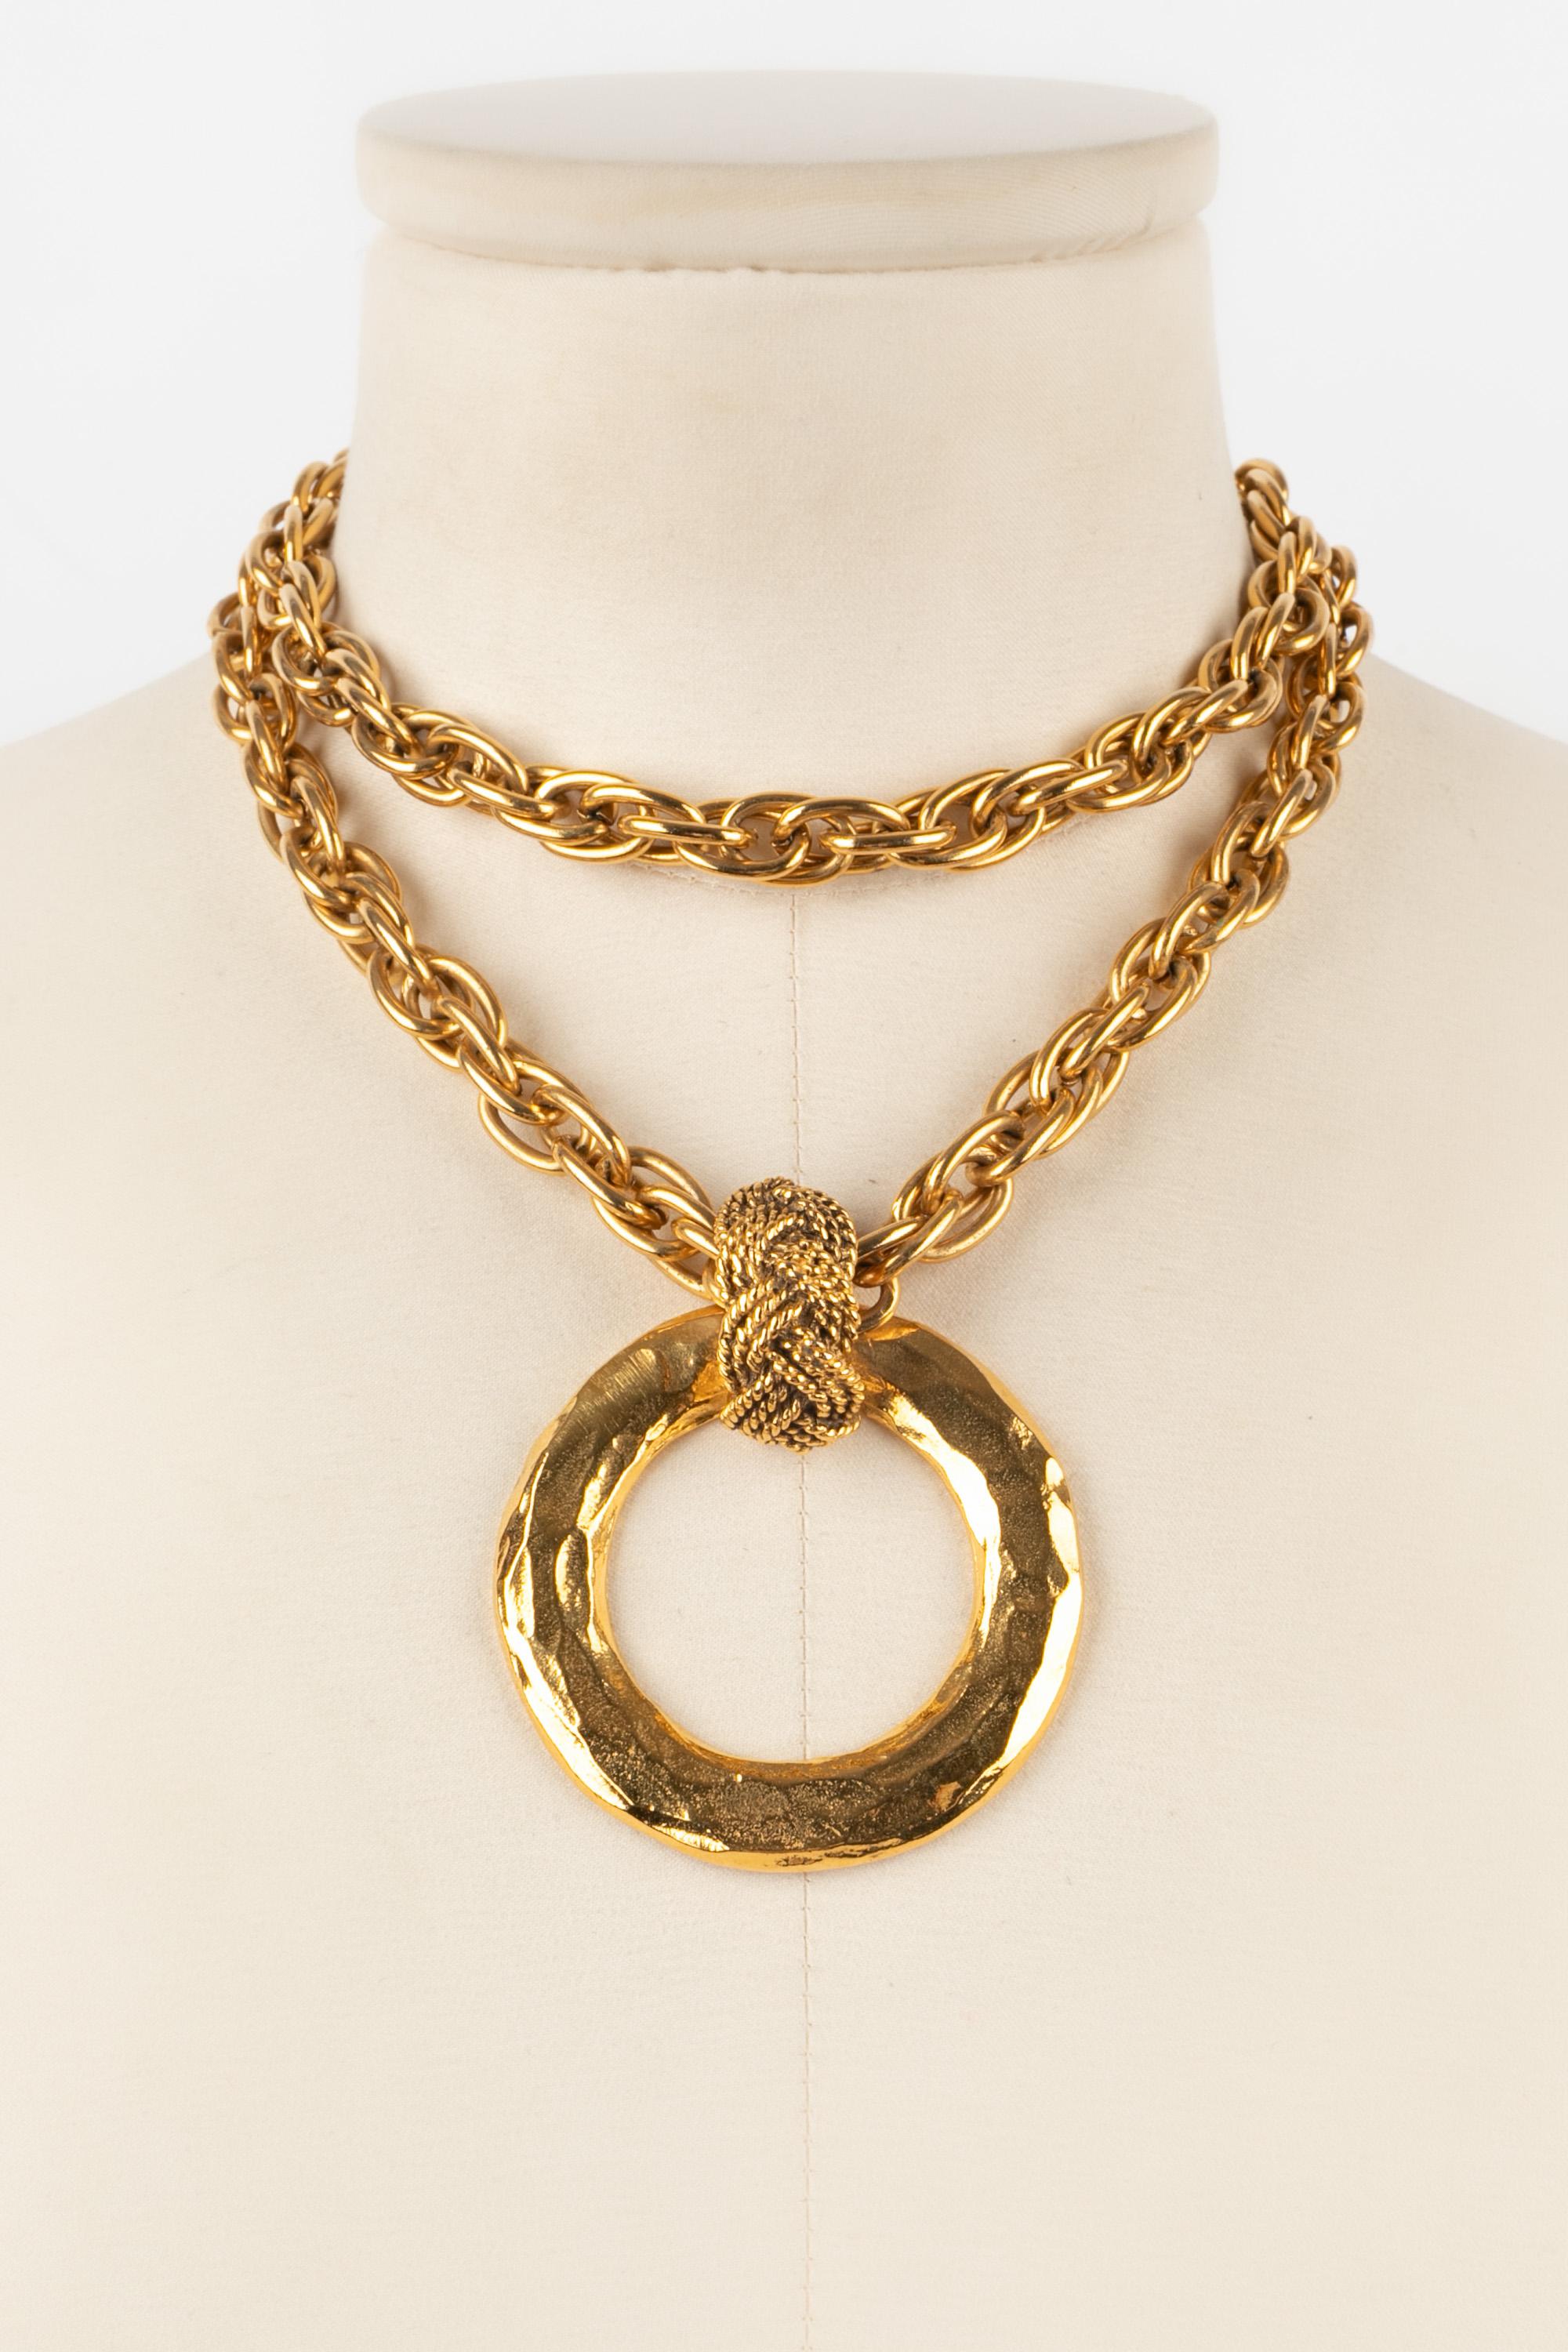 Women's or Men's Chanel necklace 1980s For Sale